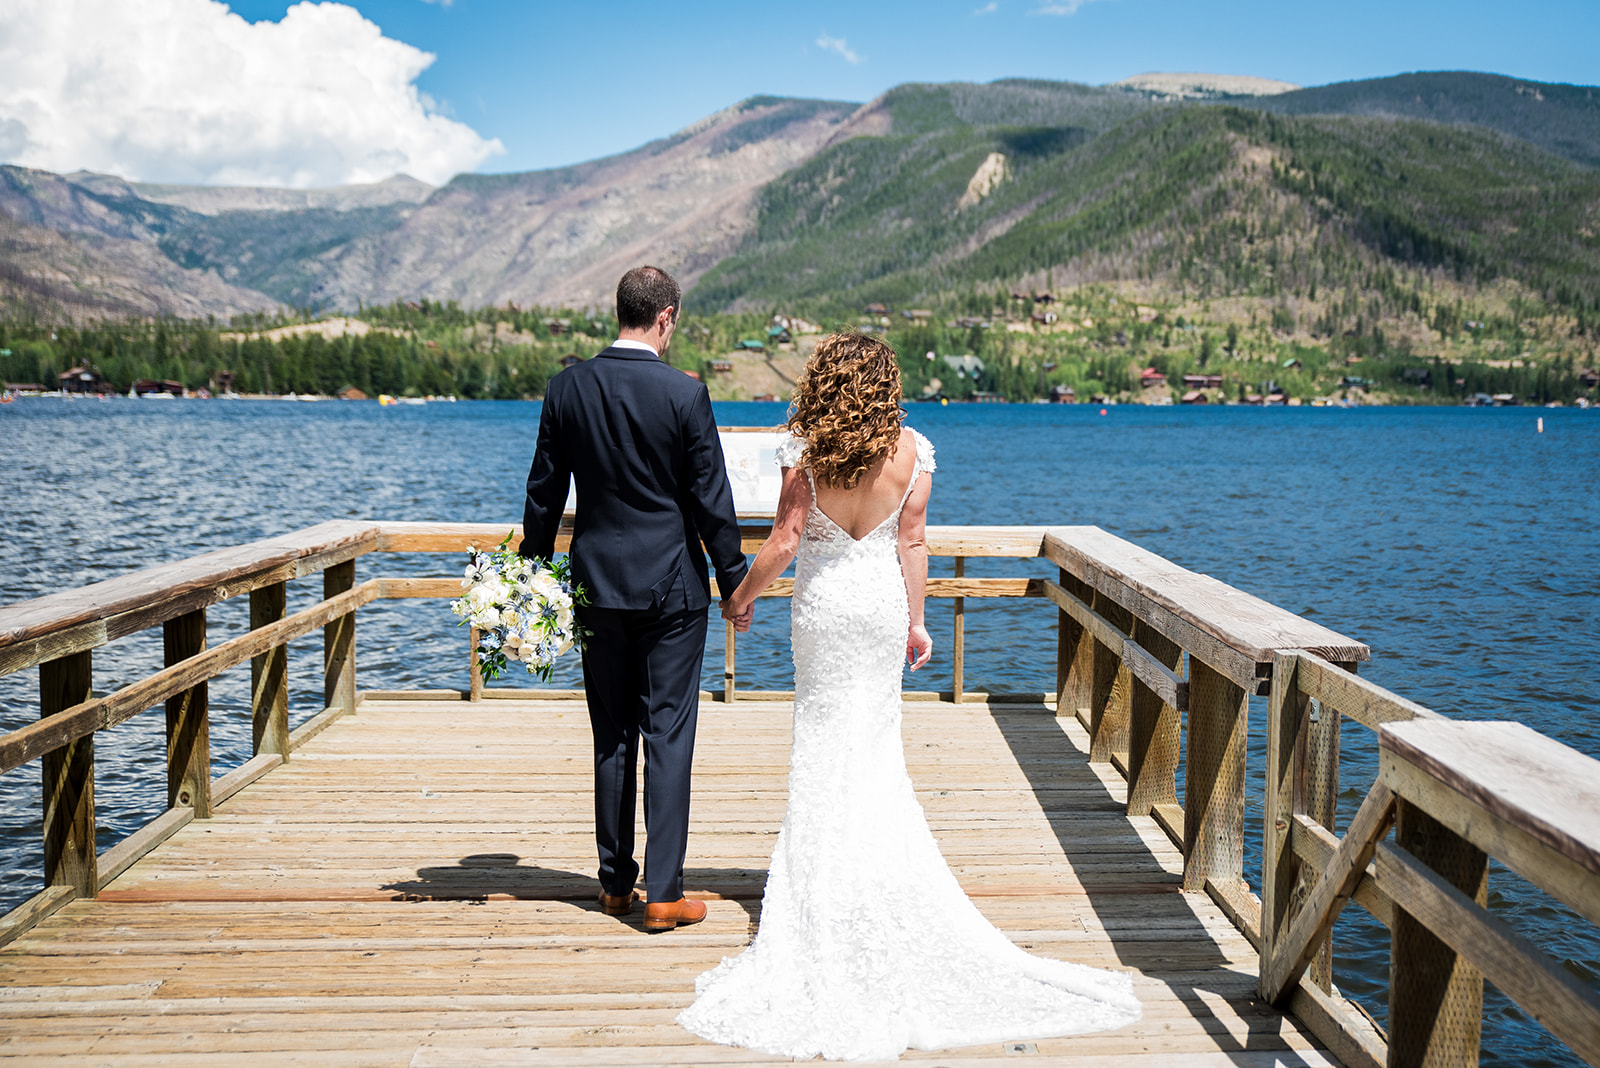 Bride and groom walk hand in hand away from the camera with lake and mountain views in the background.